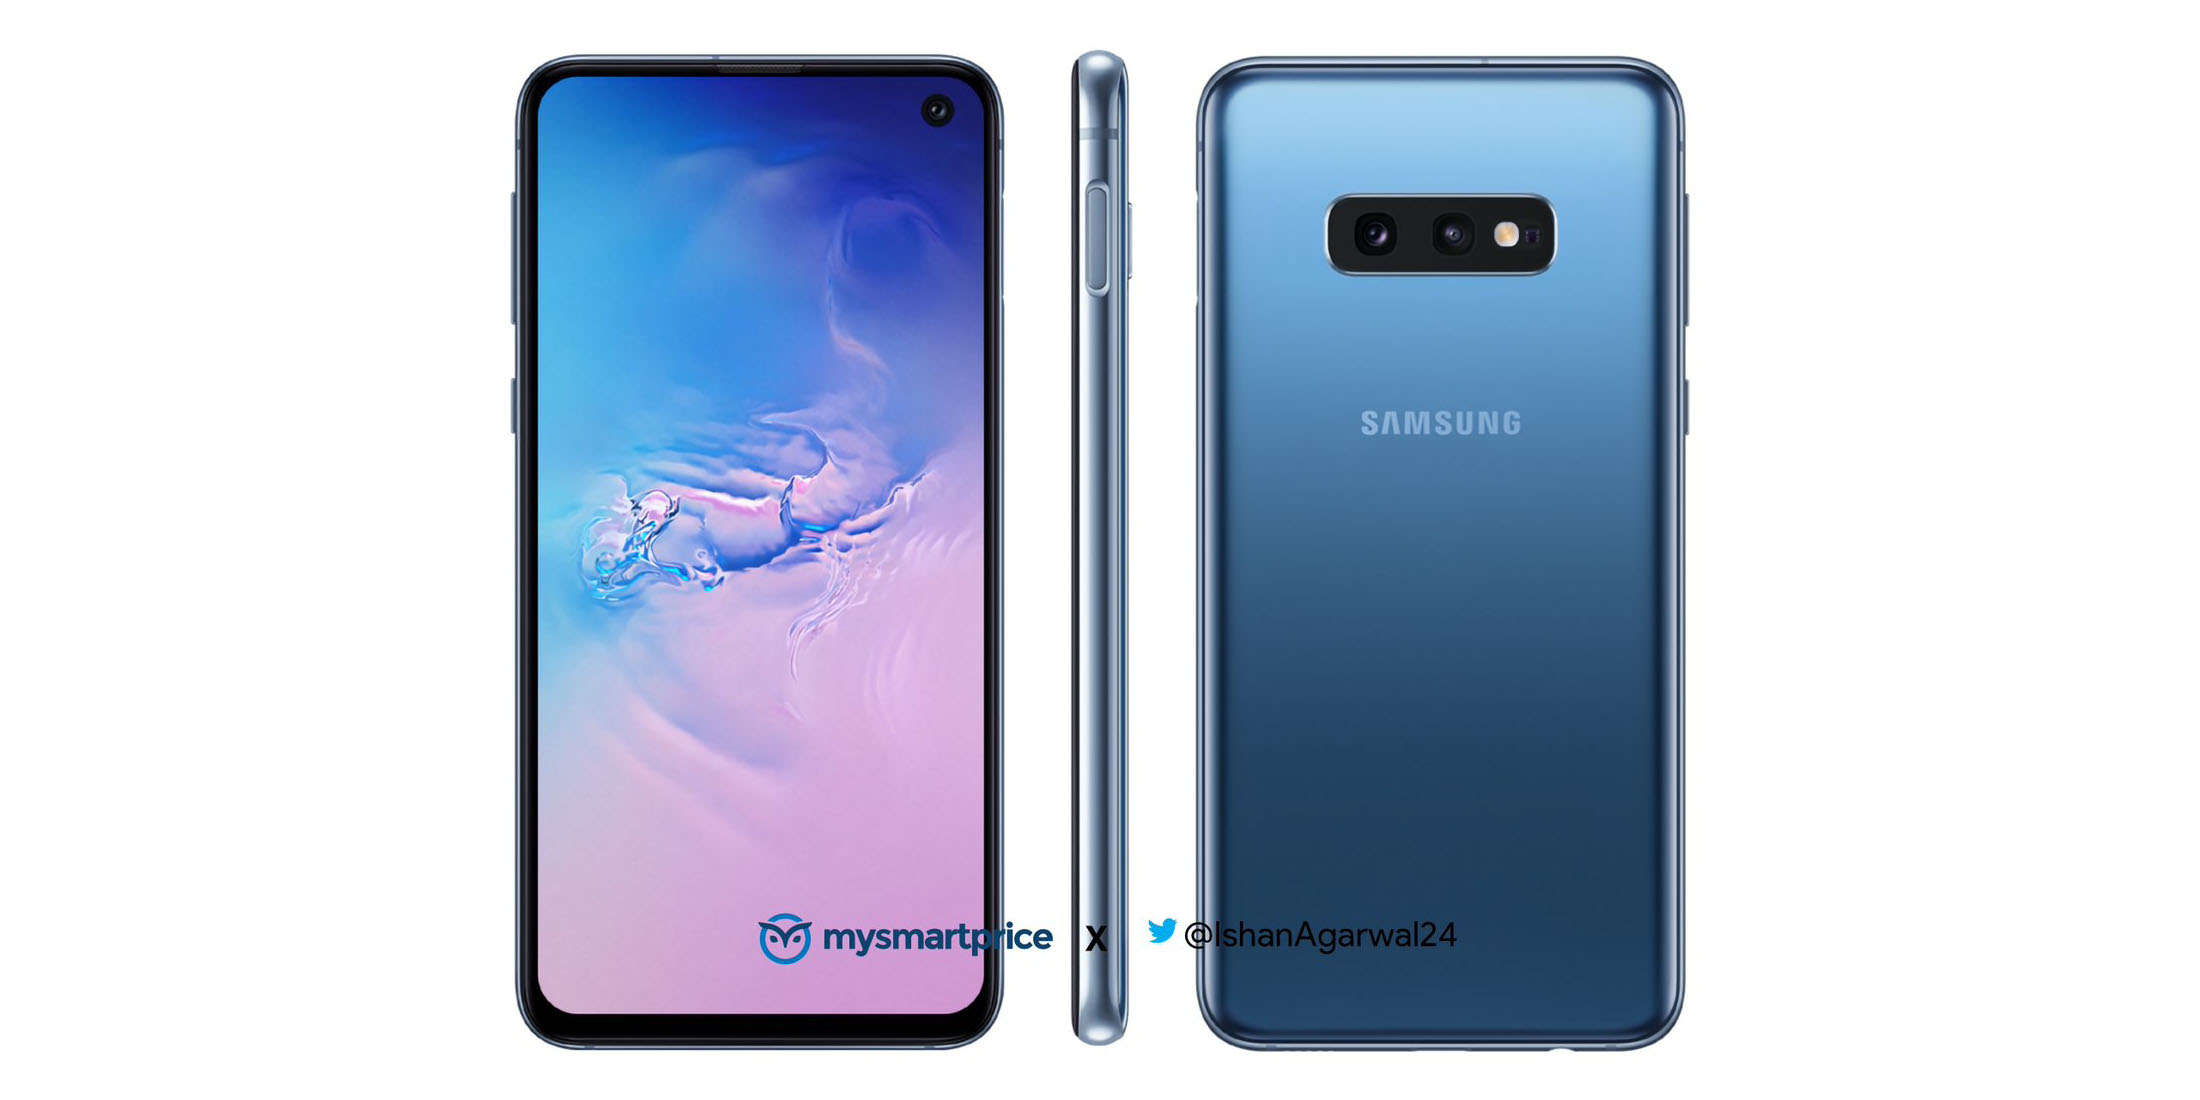 Samsung Galaxy S10 leaks in blue color, headphone jack ad - 9to5Google